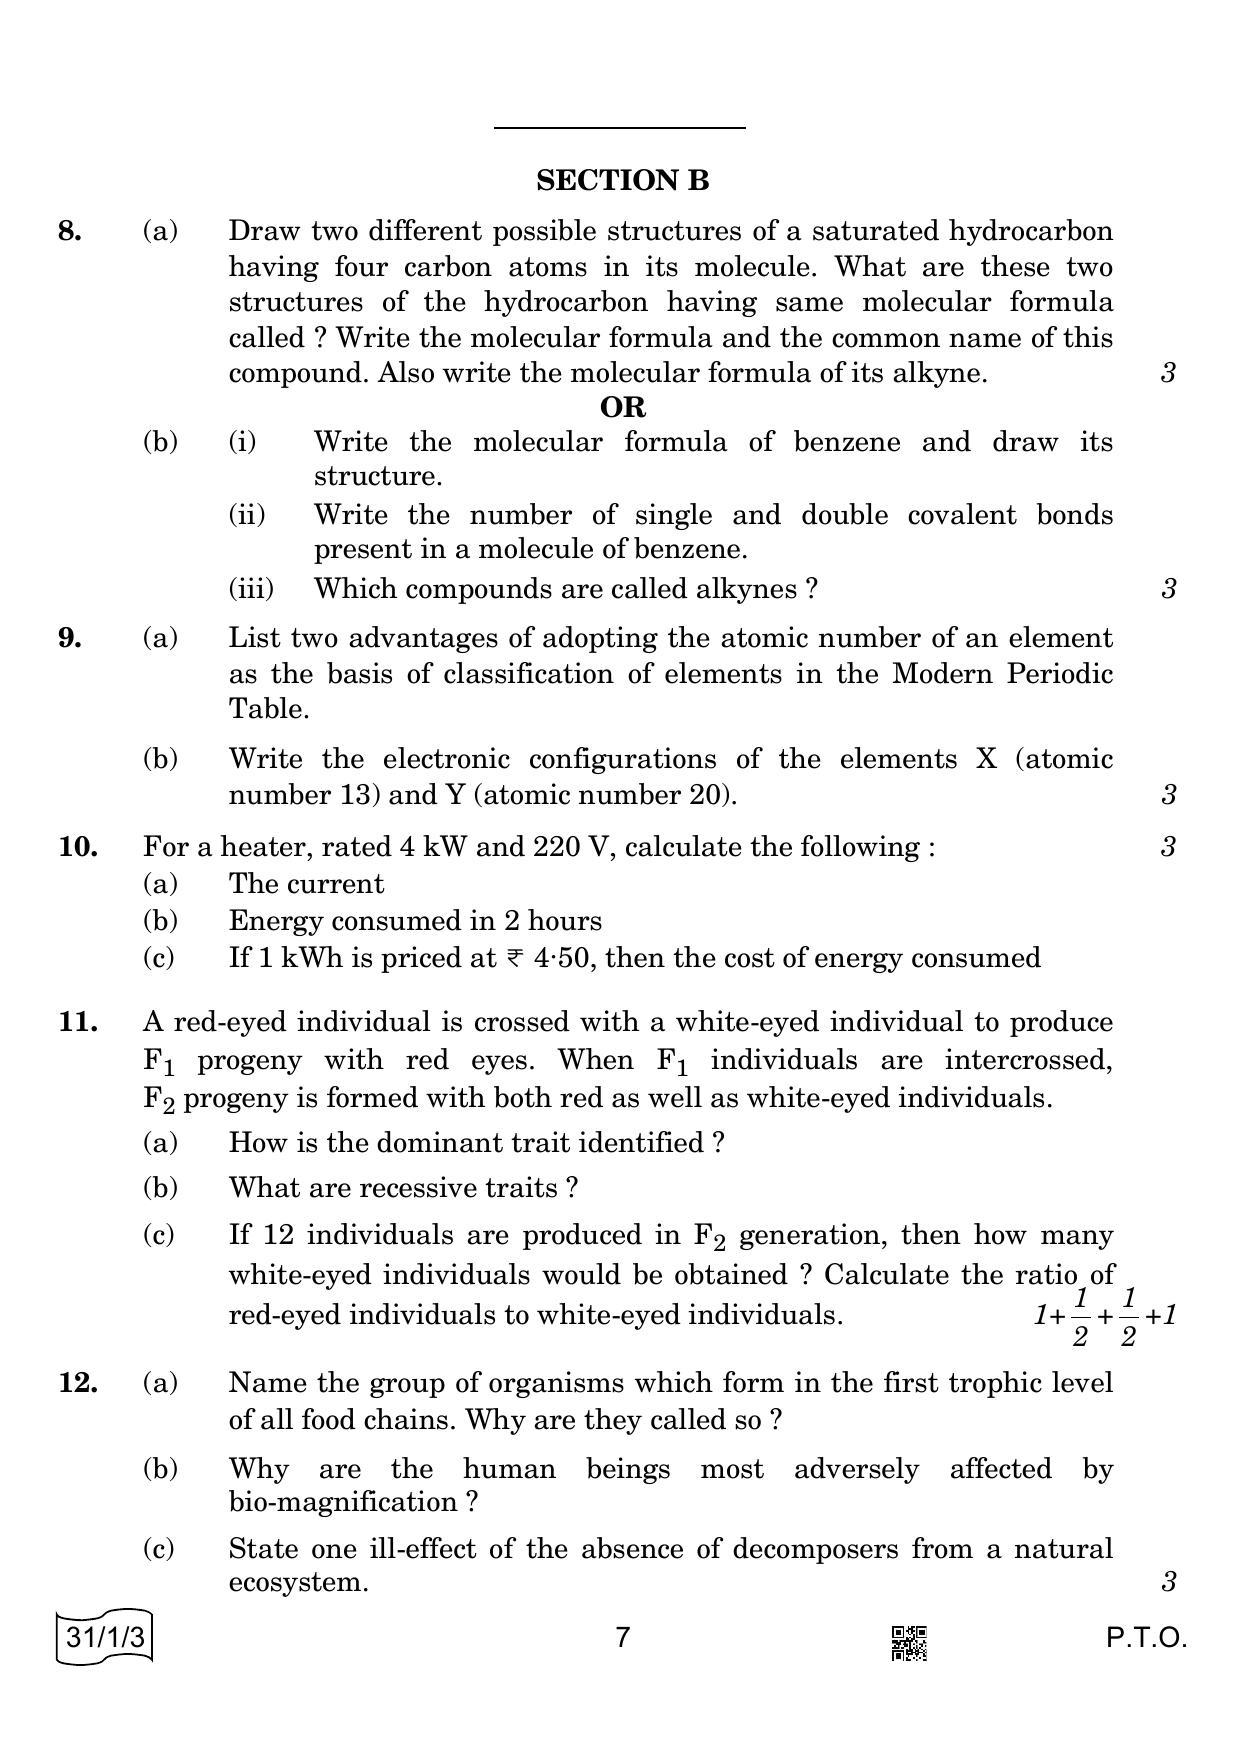 CBSE Class 10 31-1-3 Science 2022 Question Paper - Page 7